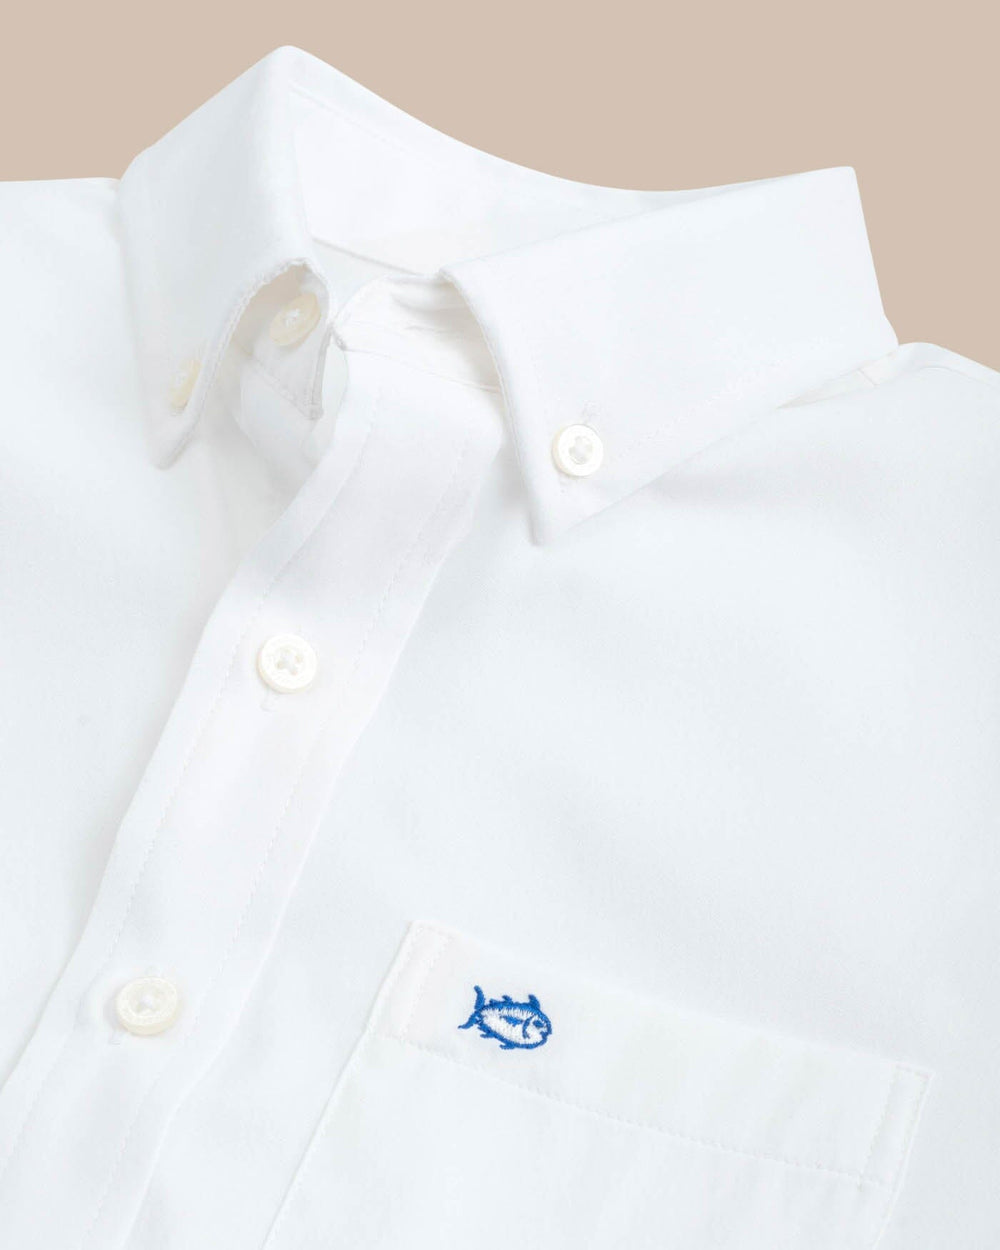 The collar of the Boys Solid Intercoastal Button Down Shirt by Southern Tide - Classic White